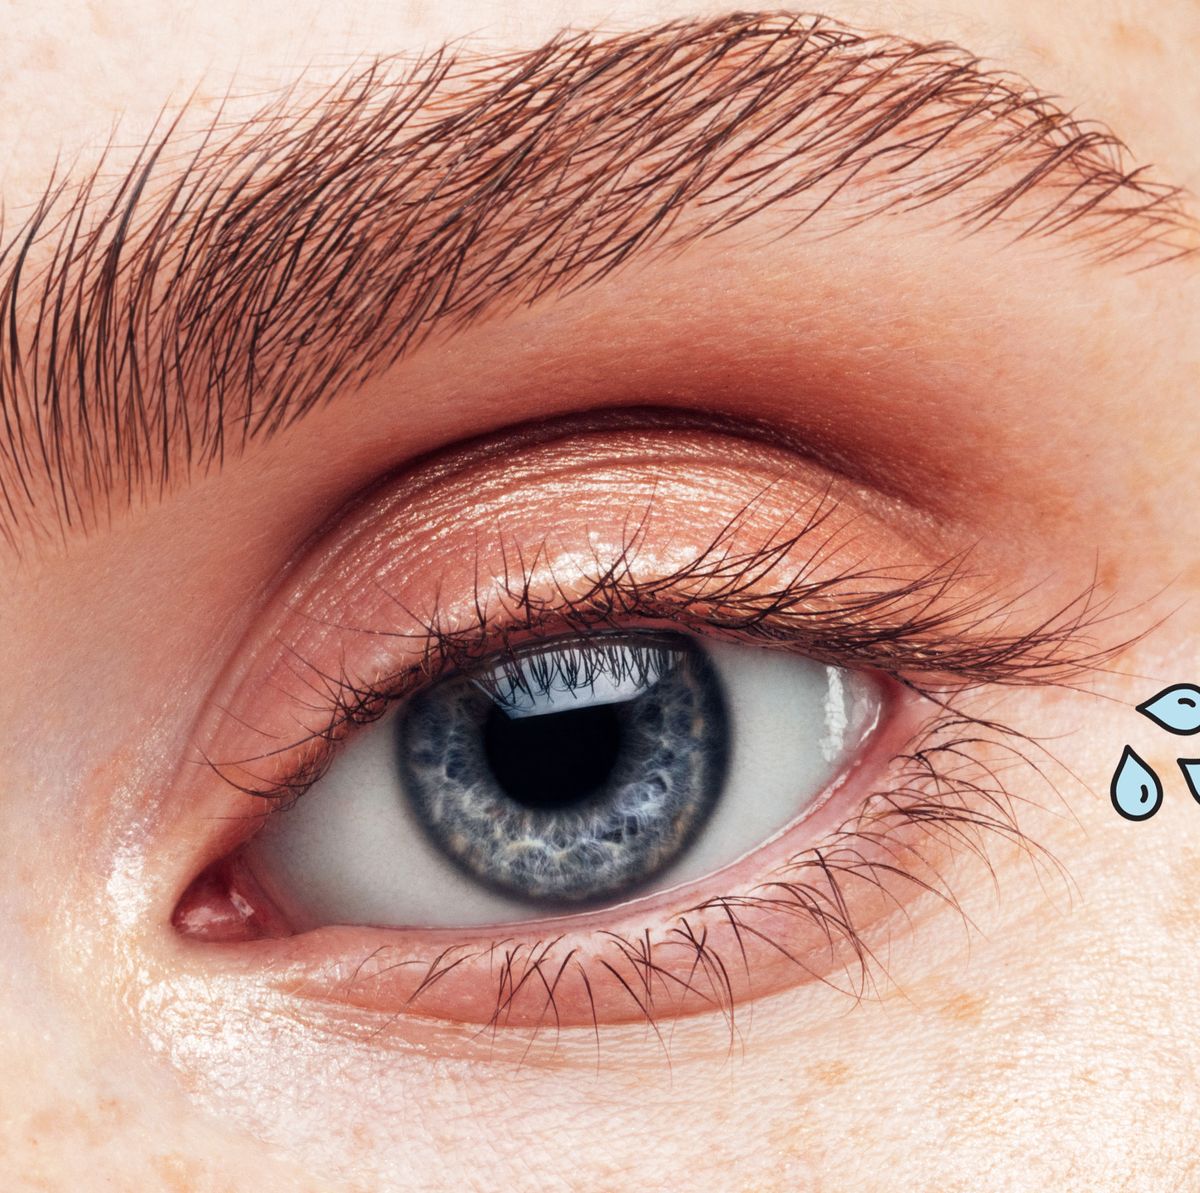 How to Clean and Care for Eyelash Extensions, According to Lash Techs